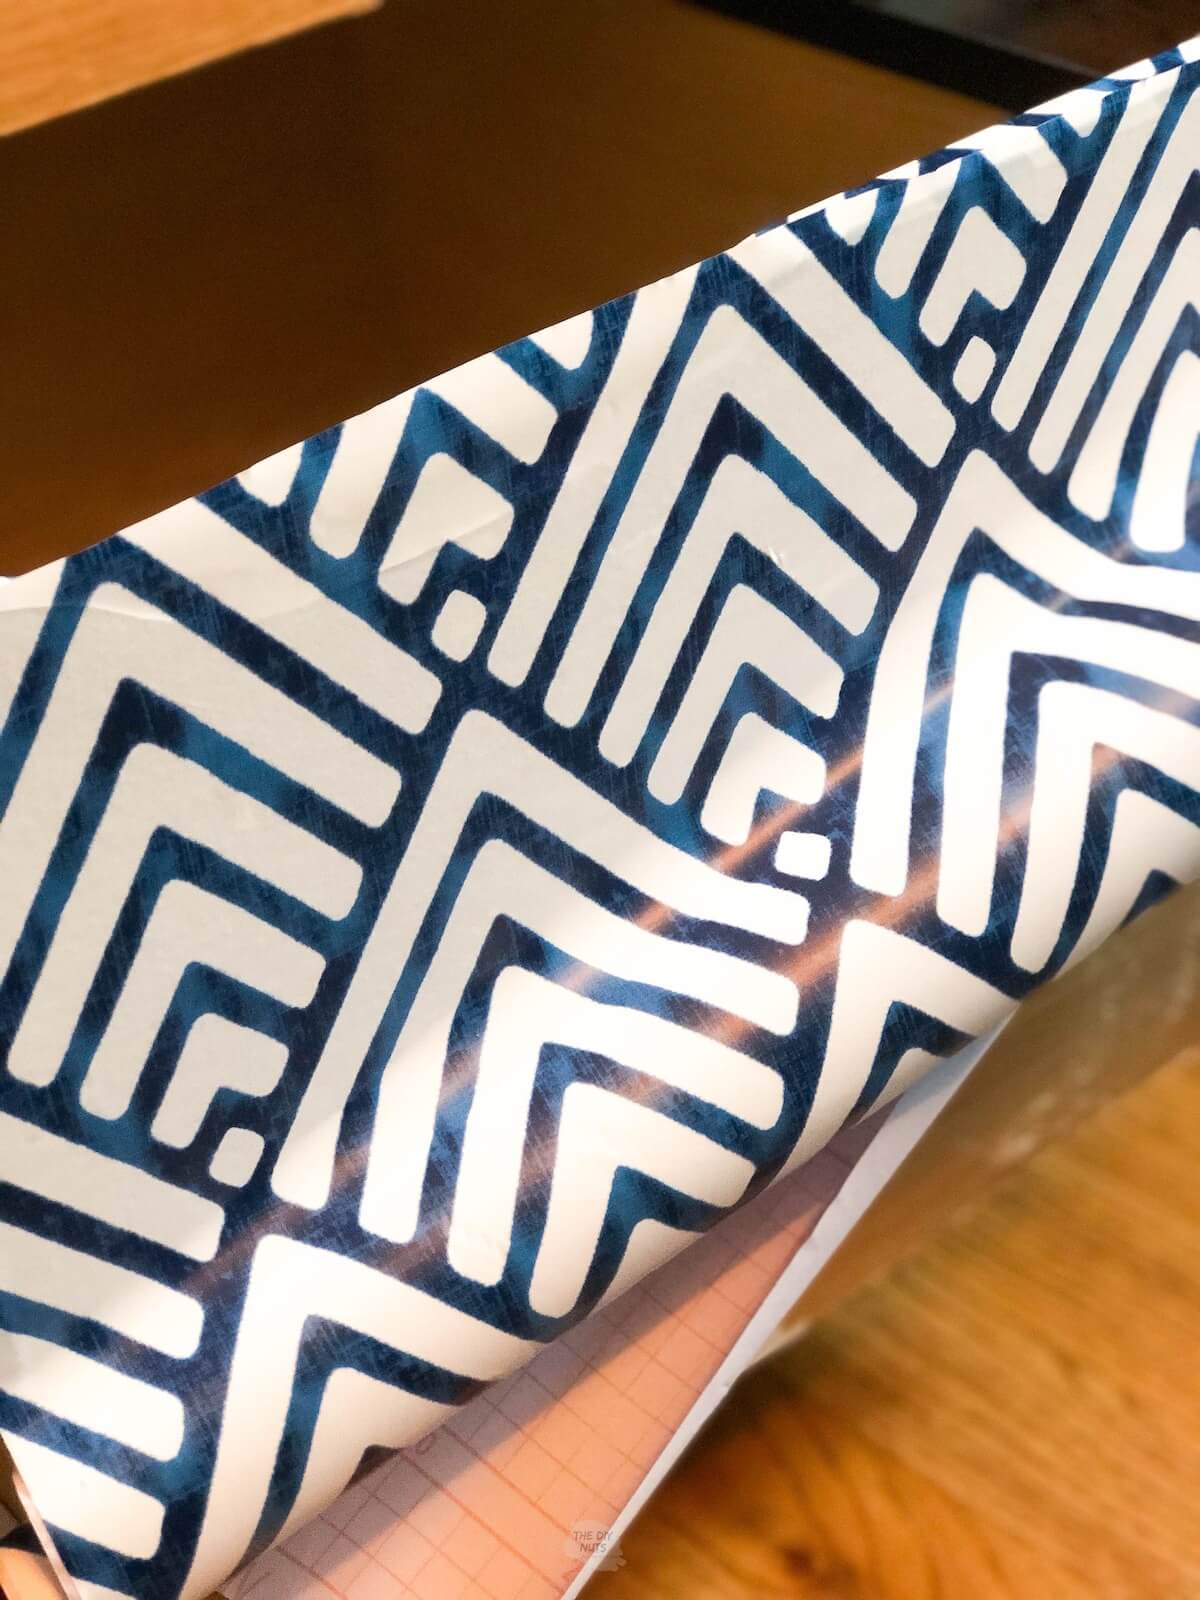 blue and white patterned contact paper partially stuck on wood.